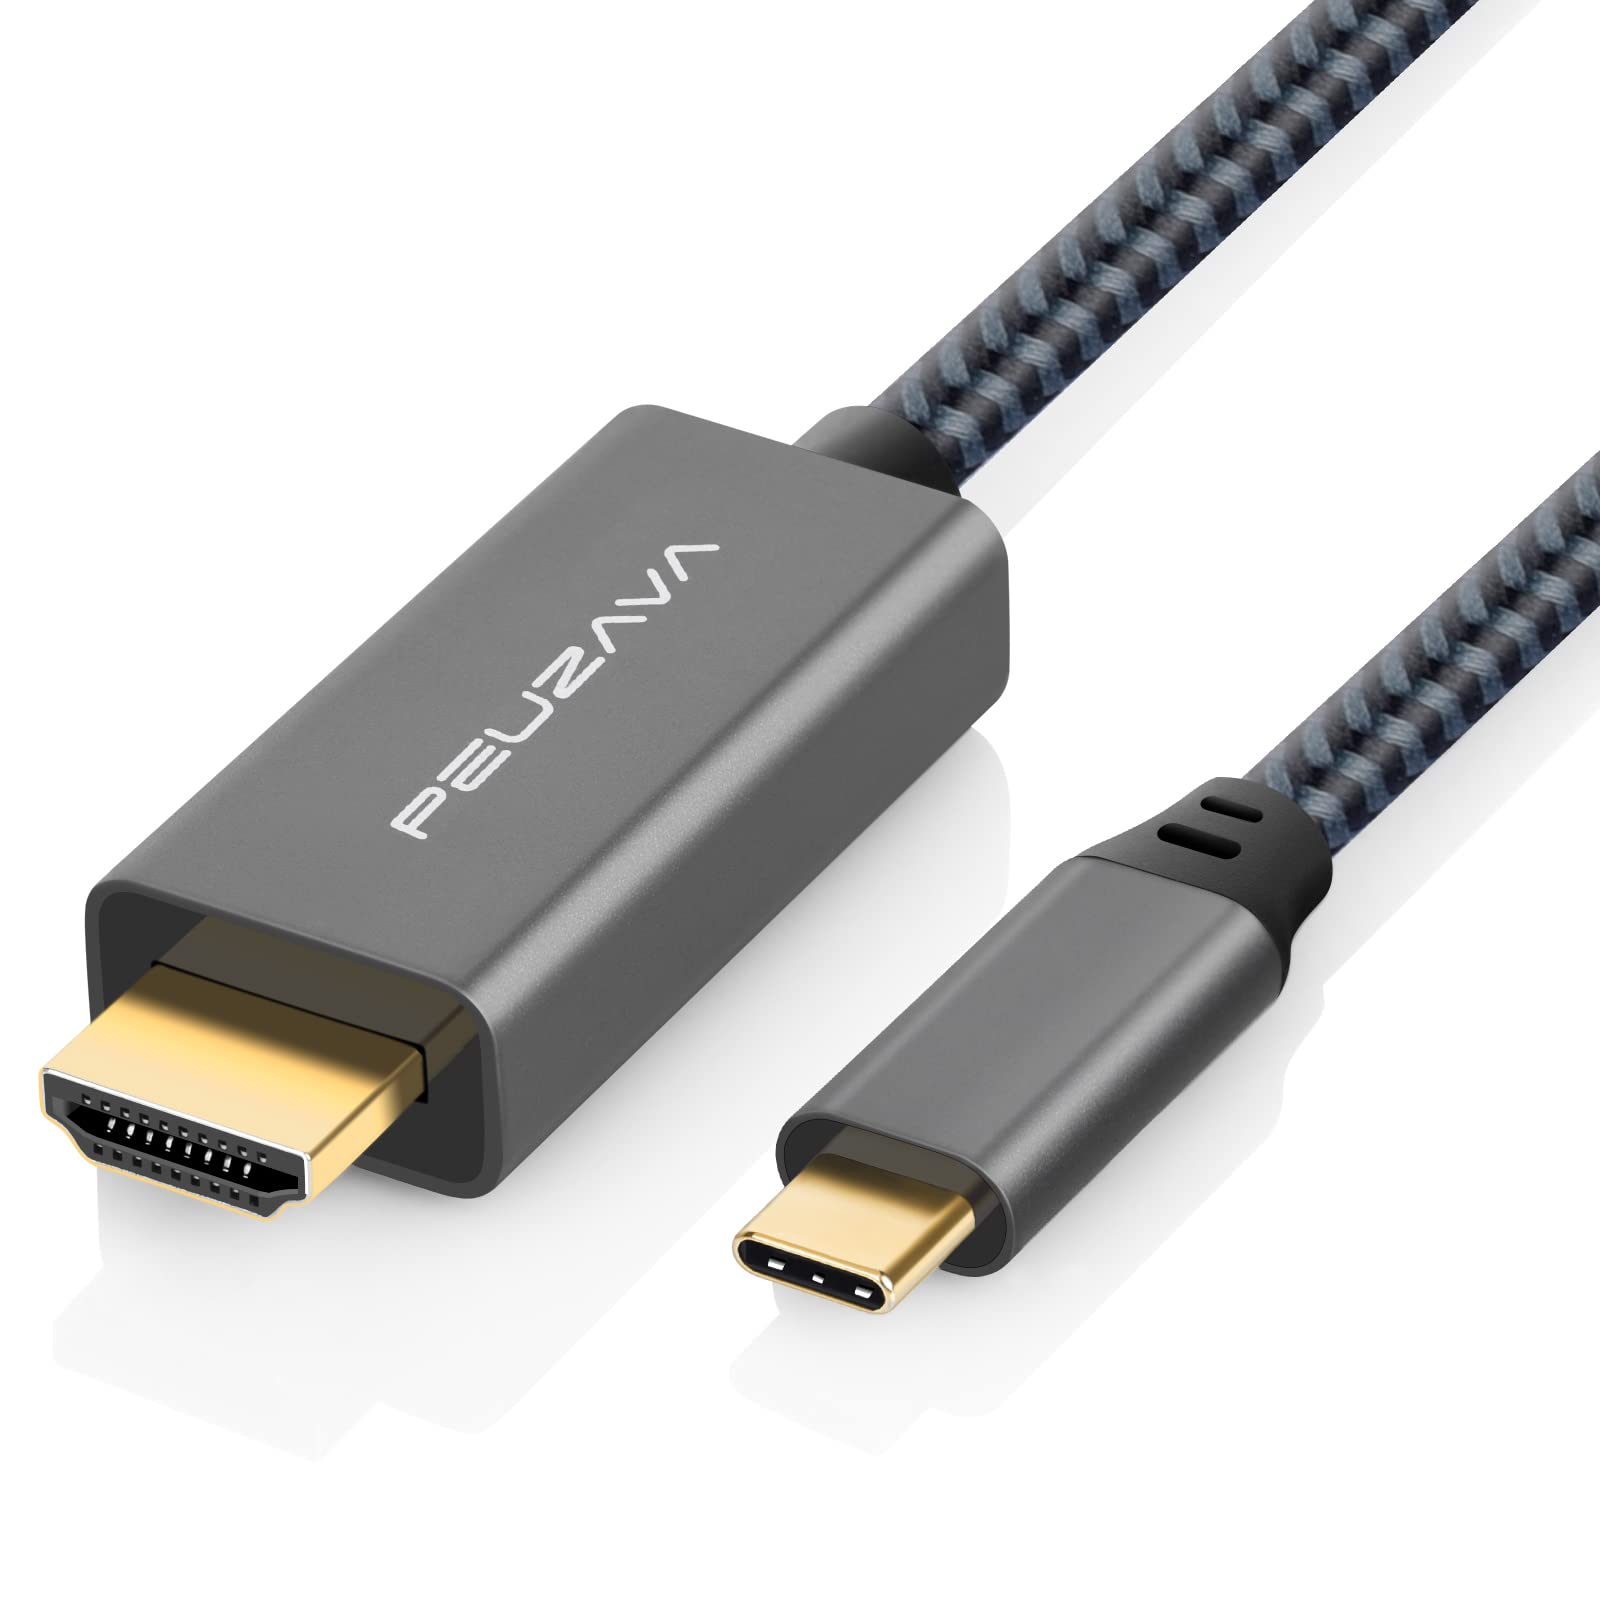 PEUZAVA USB C to HDMI Cable 3ft, Preminum 4K Type C (Thunderbolt 3/4) to HDMI Braided Cord Compatible with MacBook Pro 2020/2019/2018, MacBook Air/iPad Pro 2018, Samsung Galaxy S10/S9, Surface Book 2